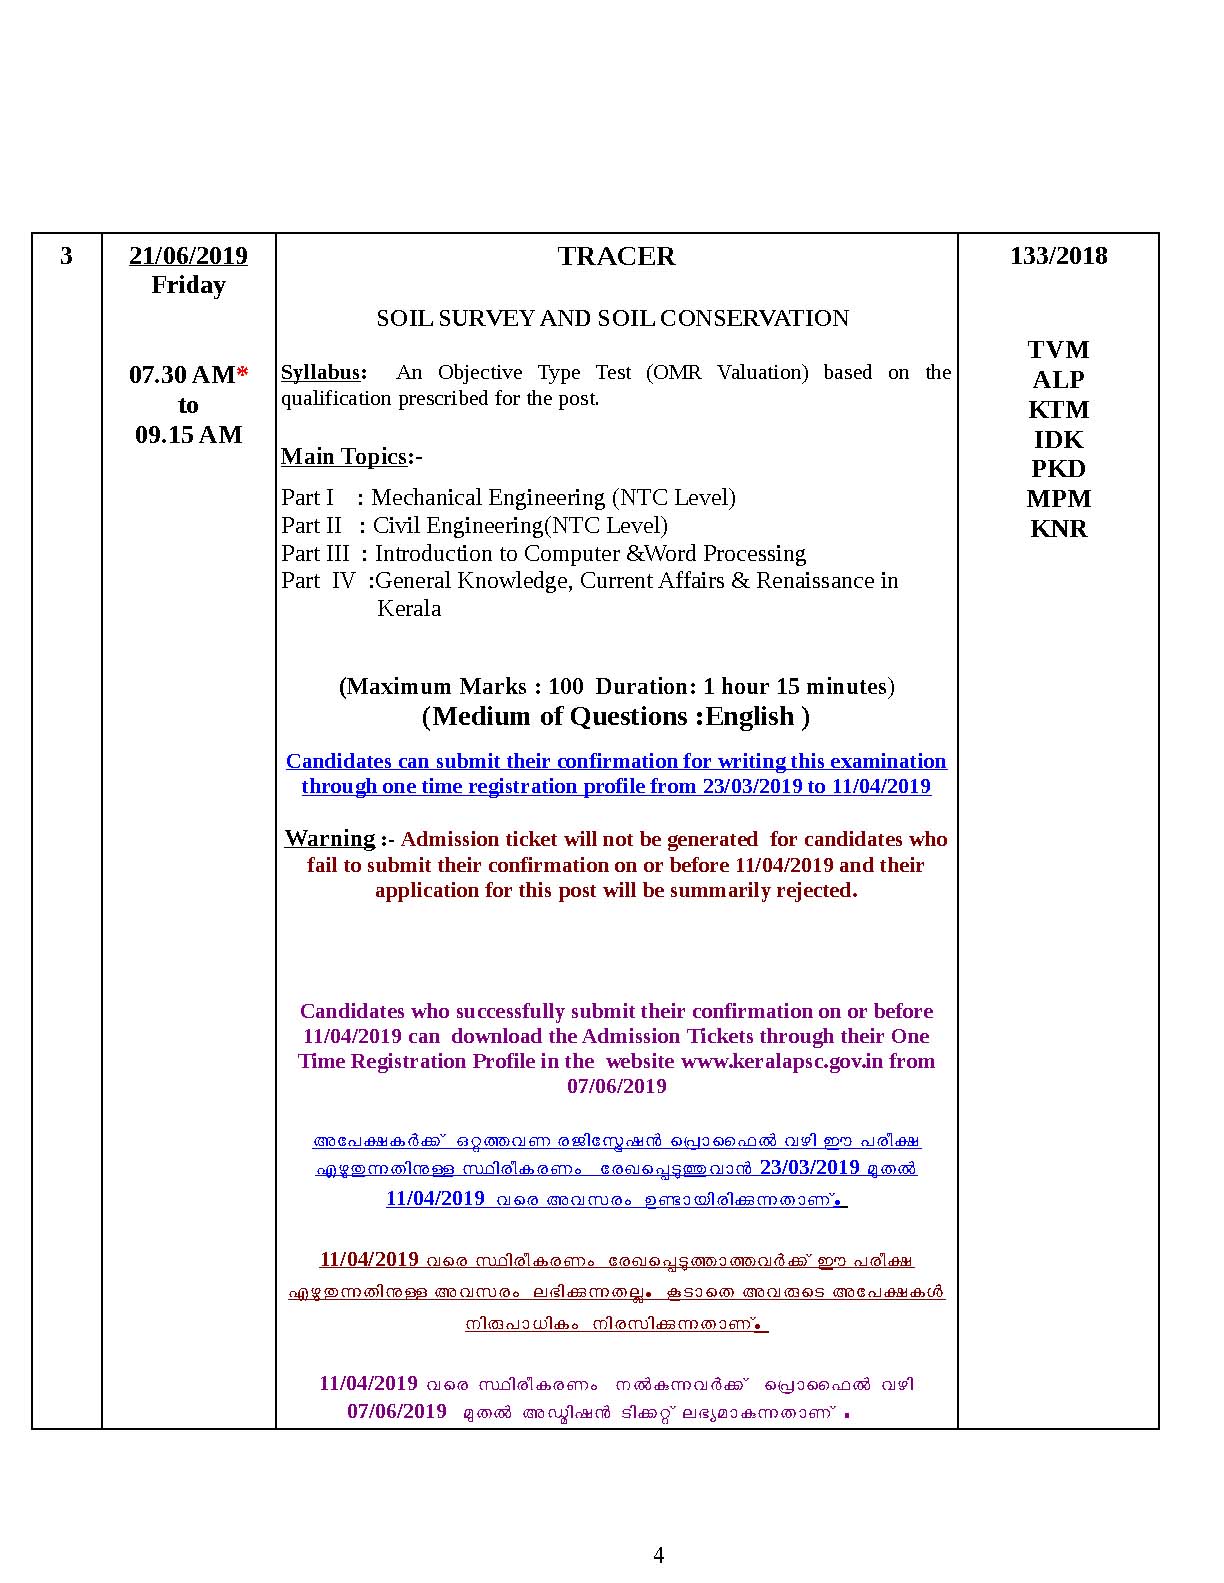 KPSC Examination Programme For The Month Of June 2019 - Notification Image 4